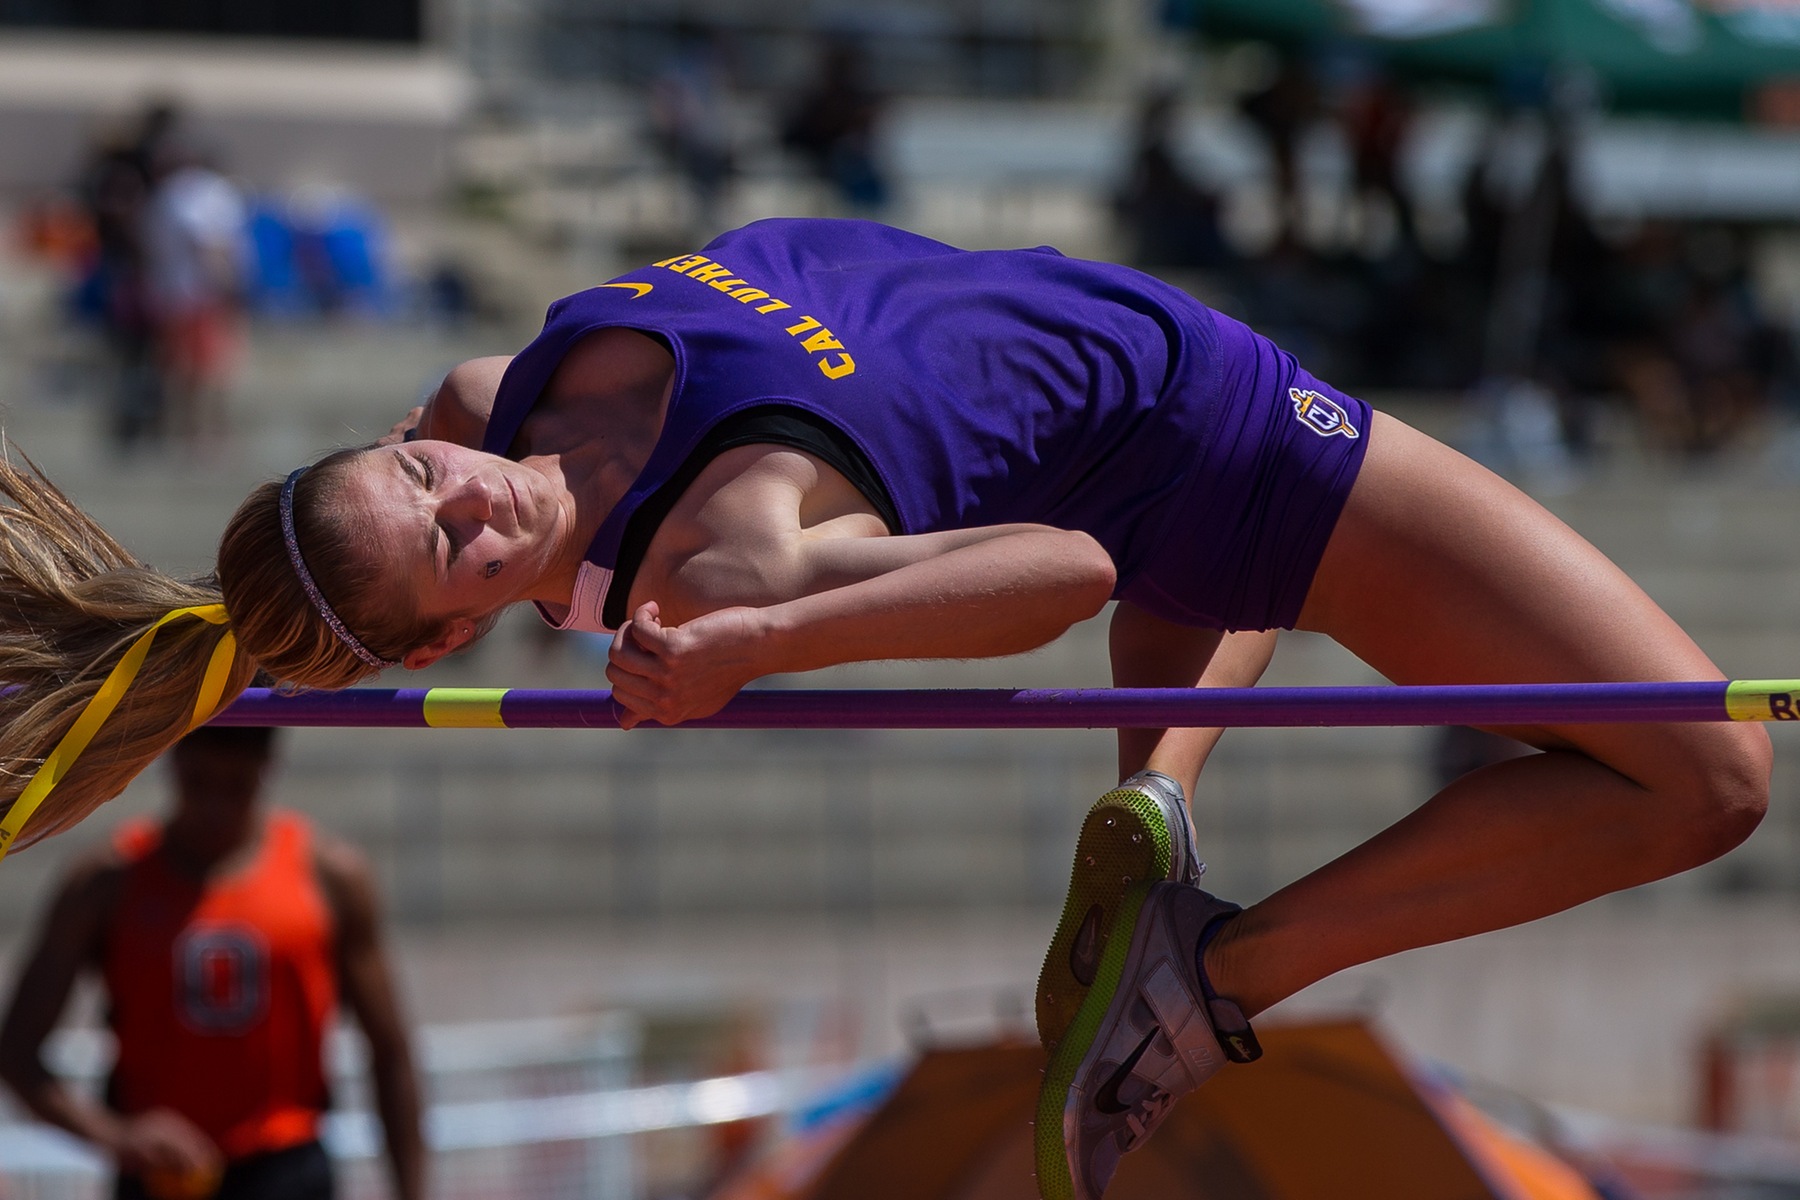 Kelsey Rouse competes in the high jump. (Credit: Dave Donovan)